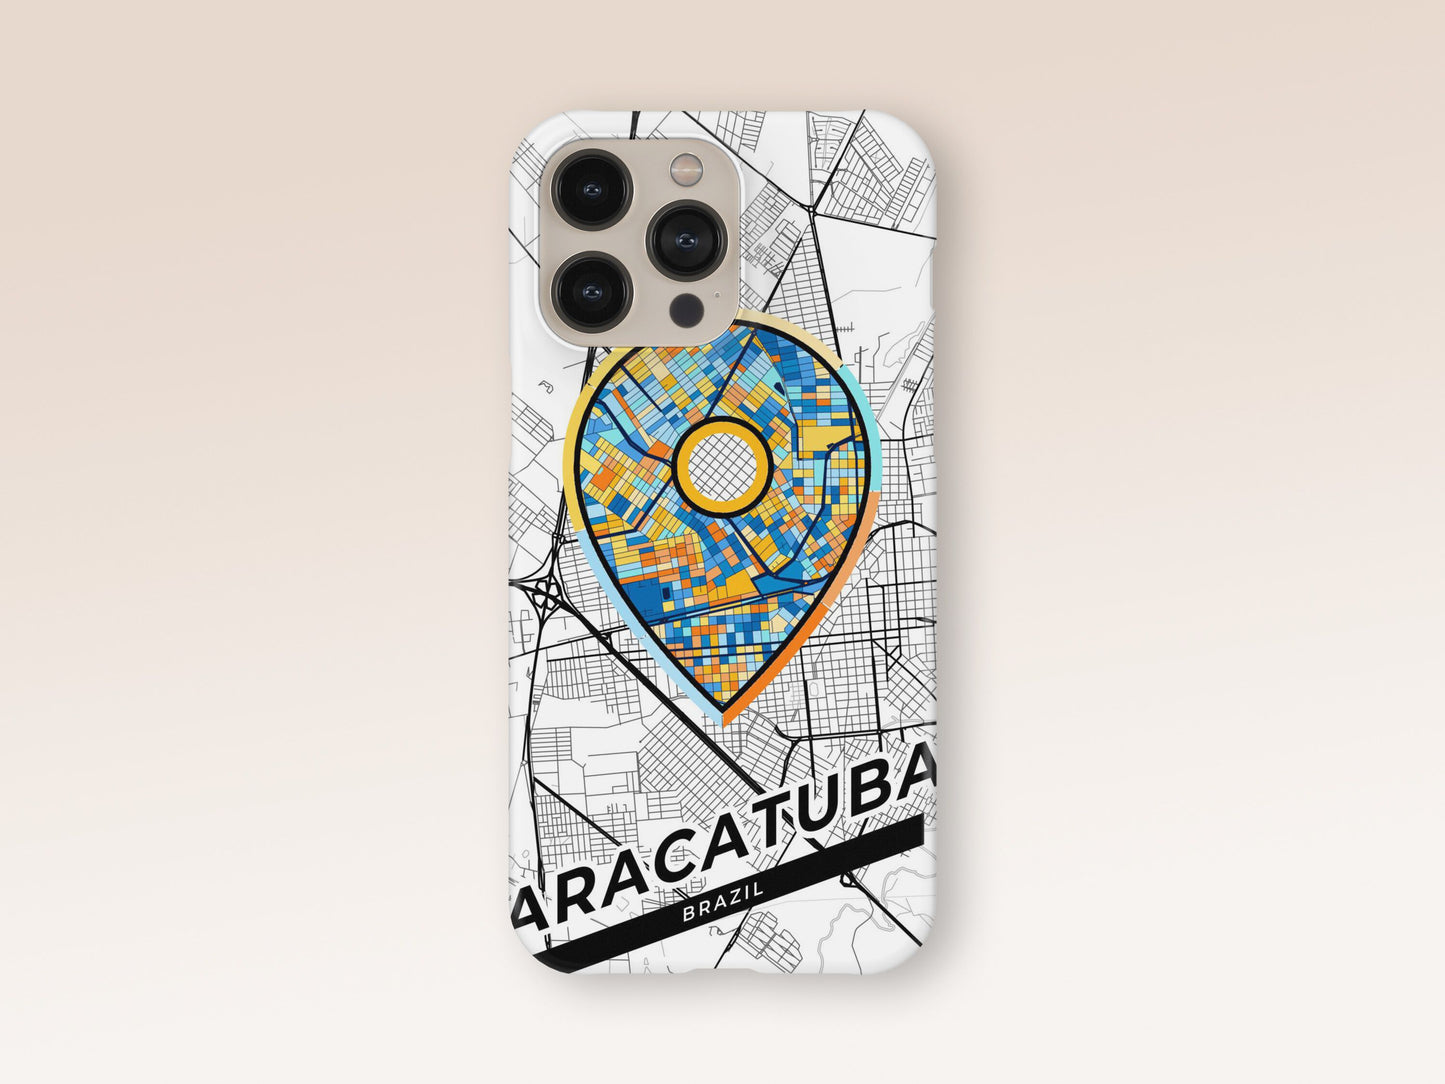 Aracatuba Brazil slim phone case with colorful icon. Birthday, wedding or housewarming gift. Couple match cases. 1